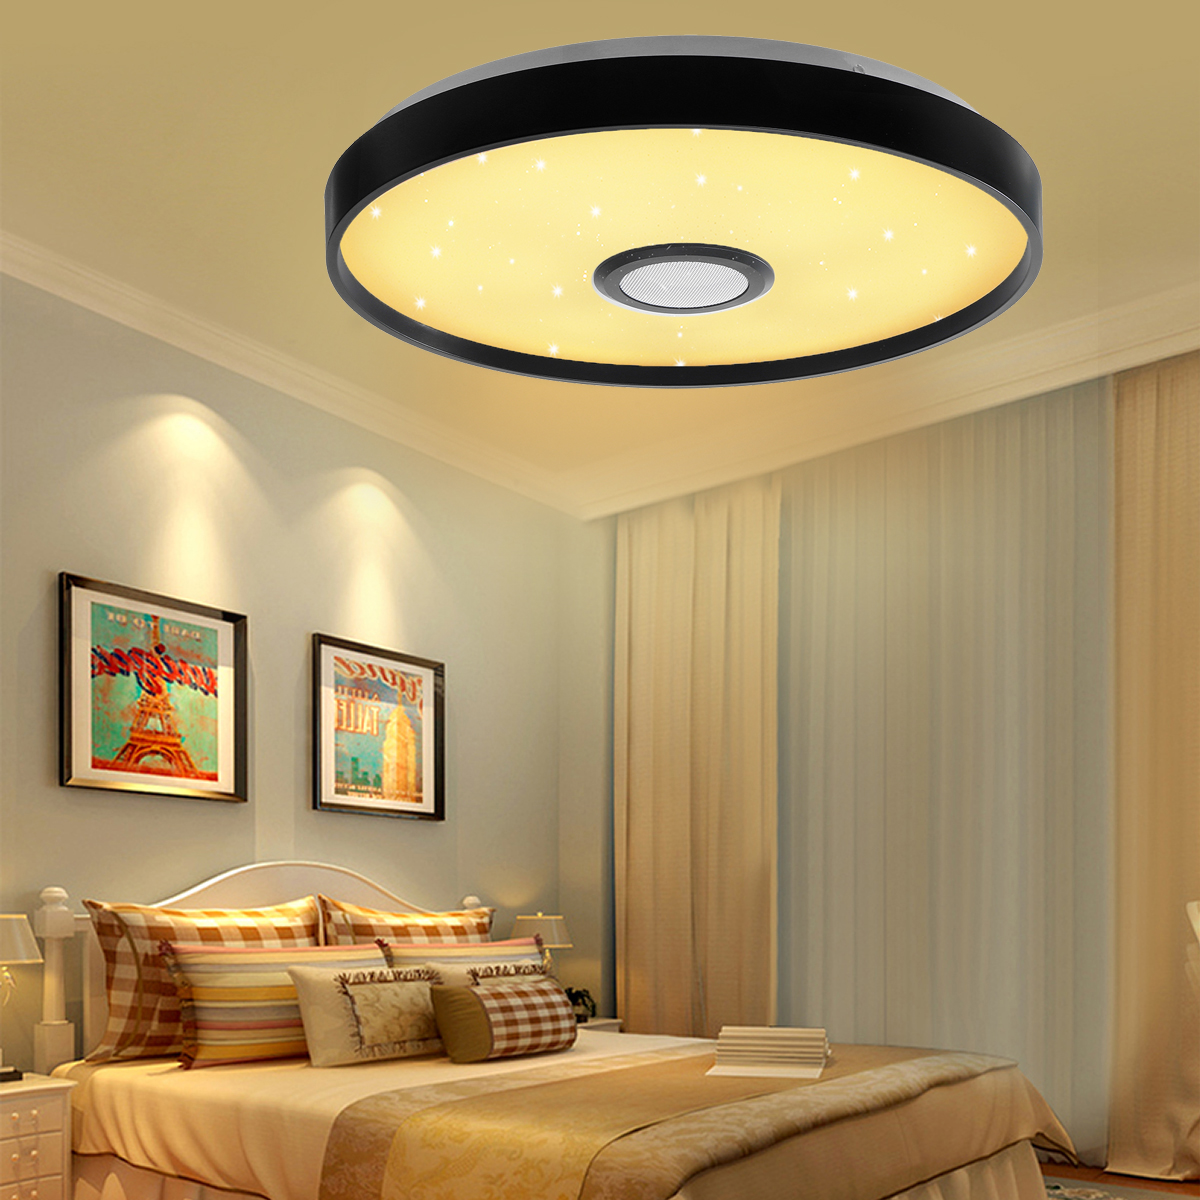 Dimmable-36W-RGB-LED-Ceiling-Light-Lamp-bluetooth-WIFI-Alexa--Google-Home--Remote-1758787-6